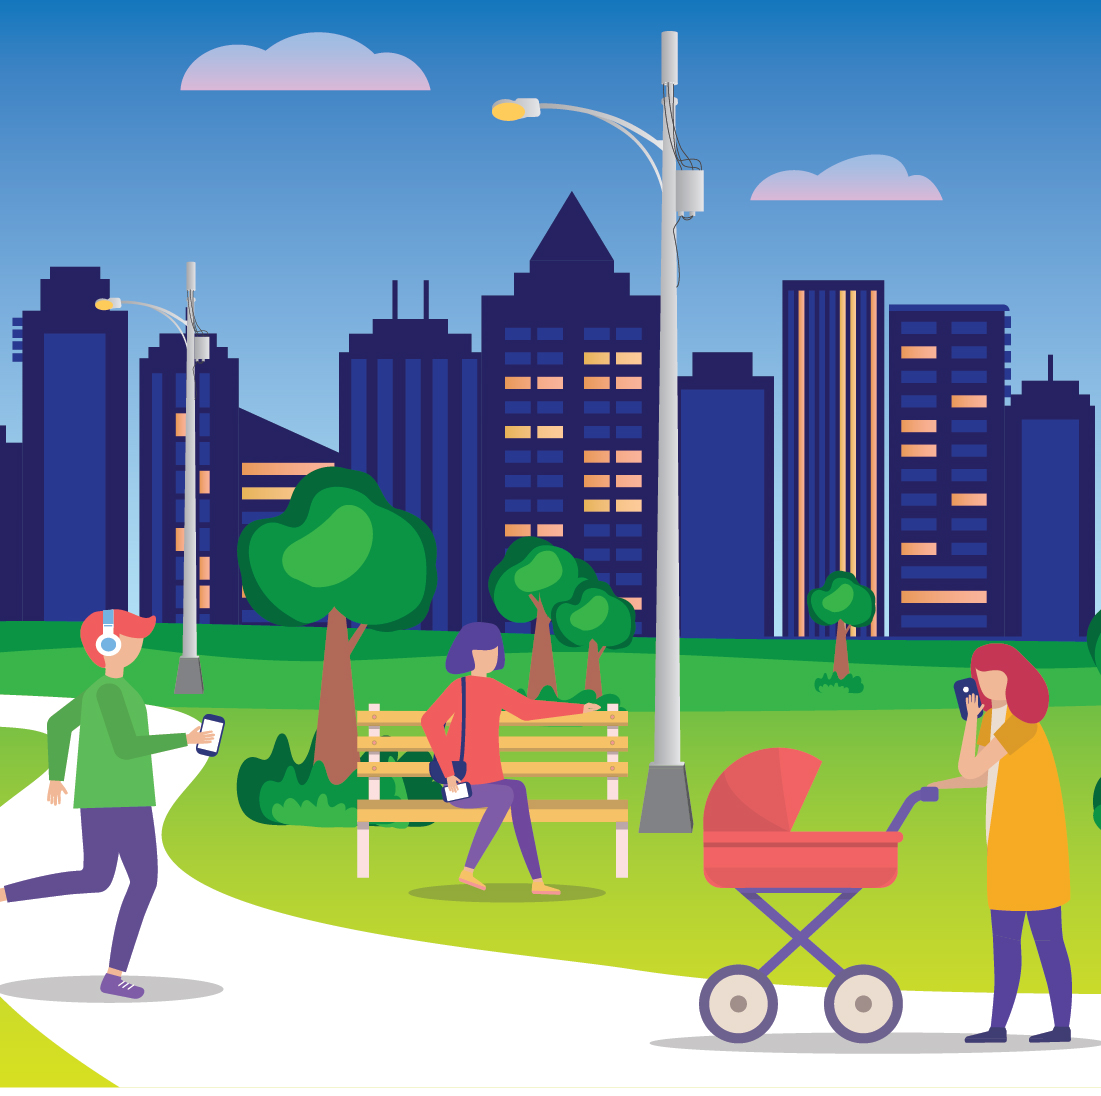 An illustration of people in a park holding smart devices with a city skyline in the background.